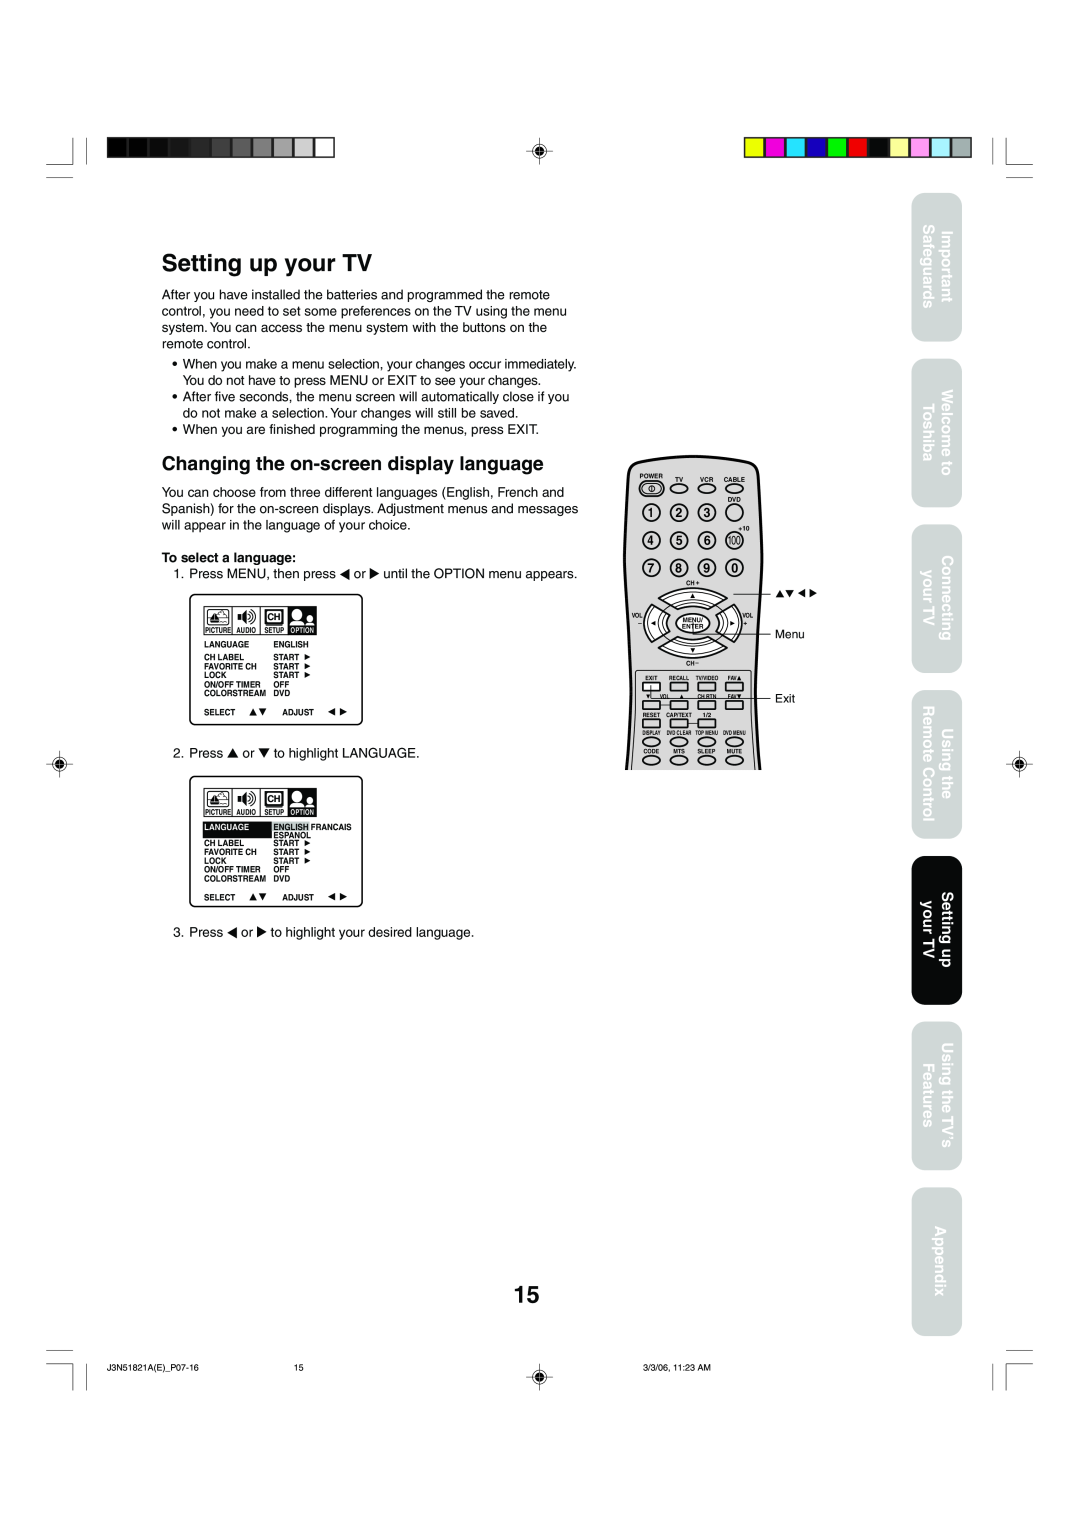 Toshiba 32A36C appendix Setting up your TV, Changing the on-screen display language, Appendix, To select a language 